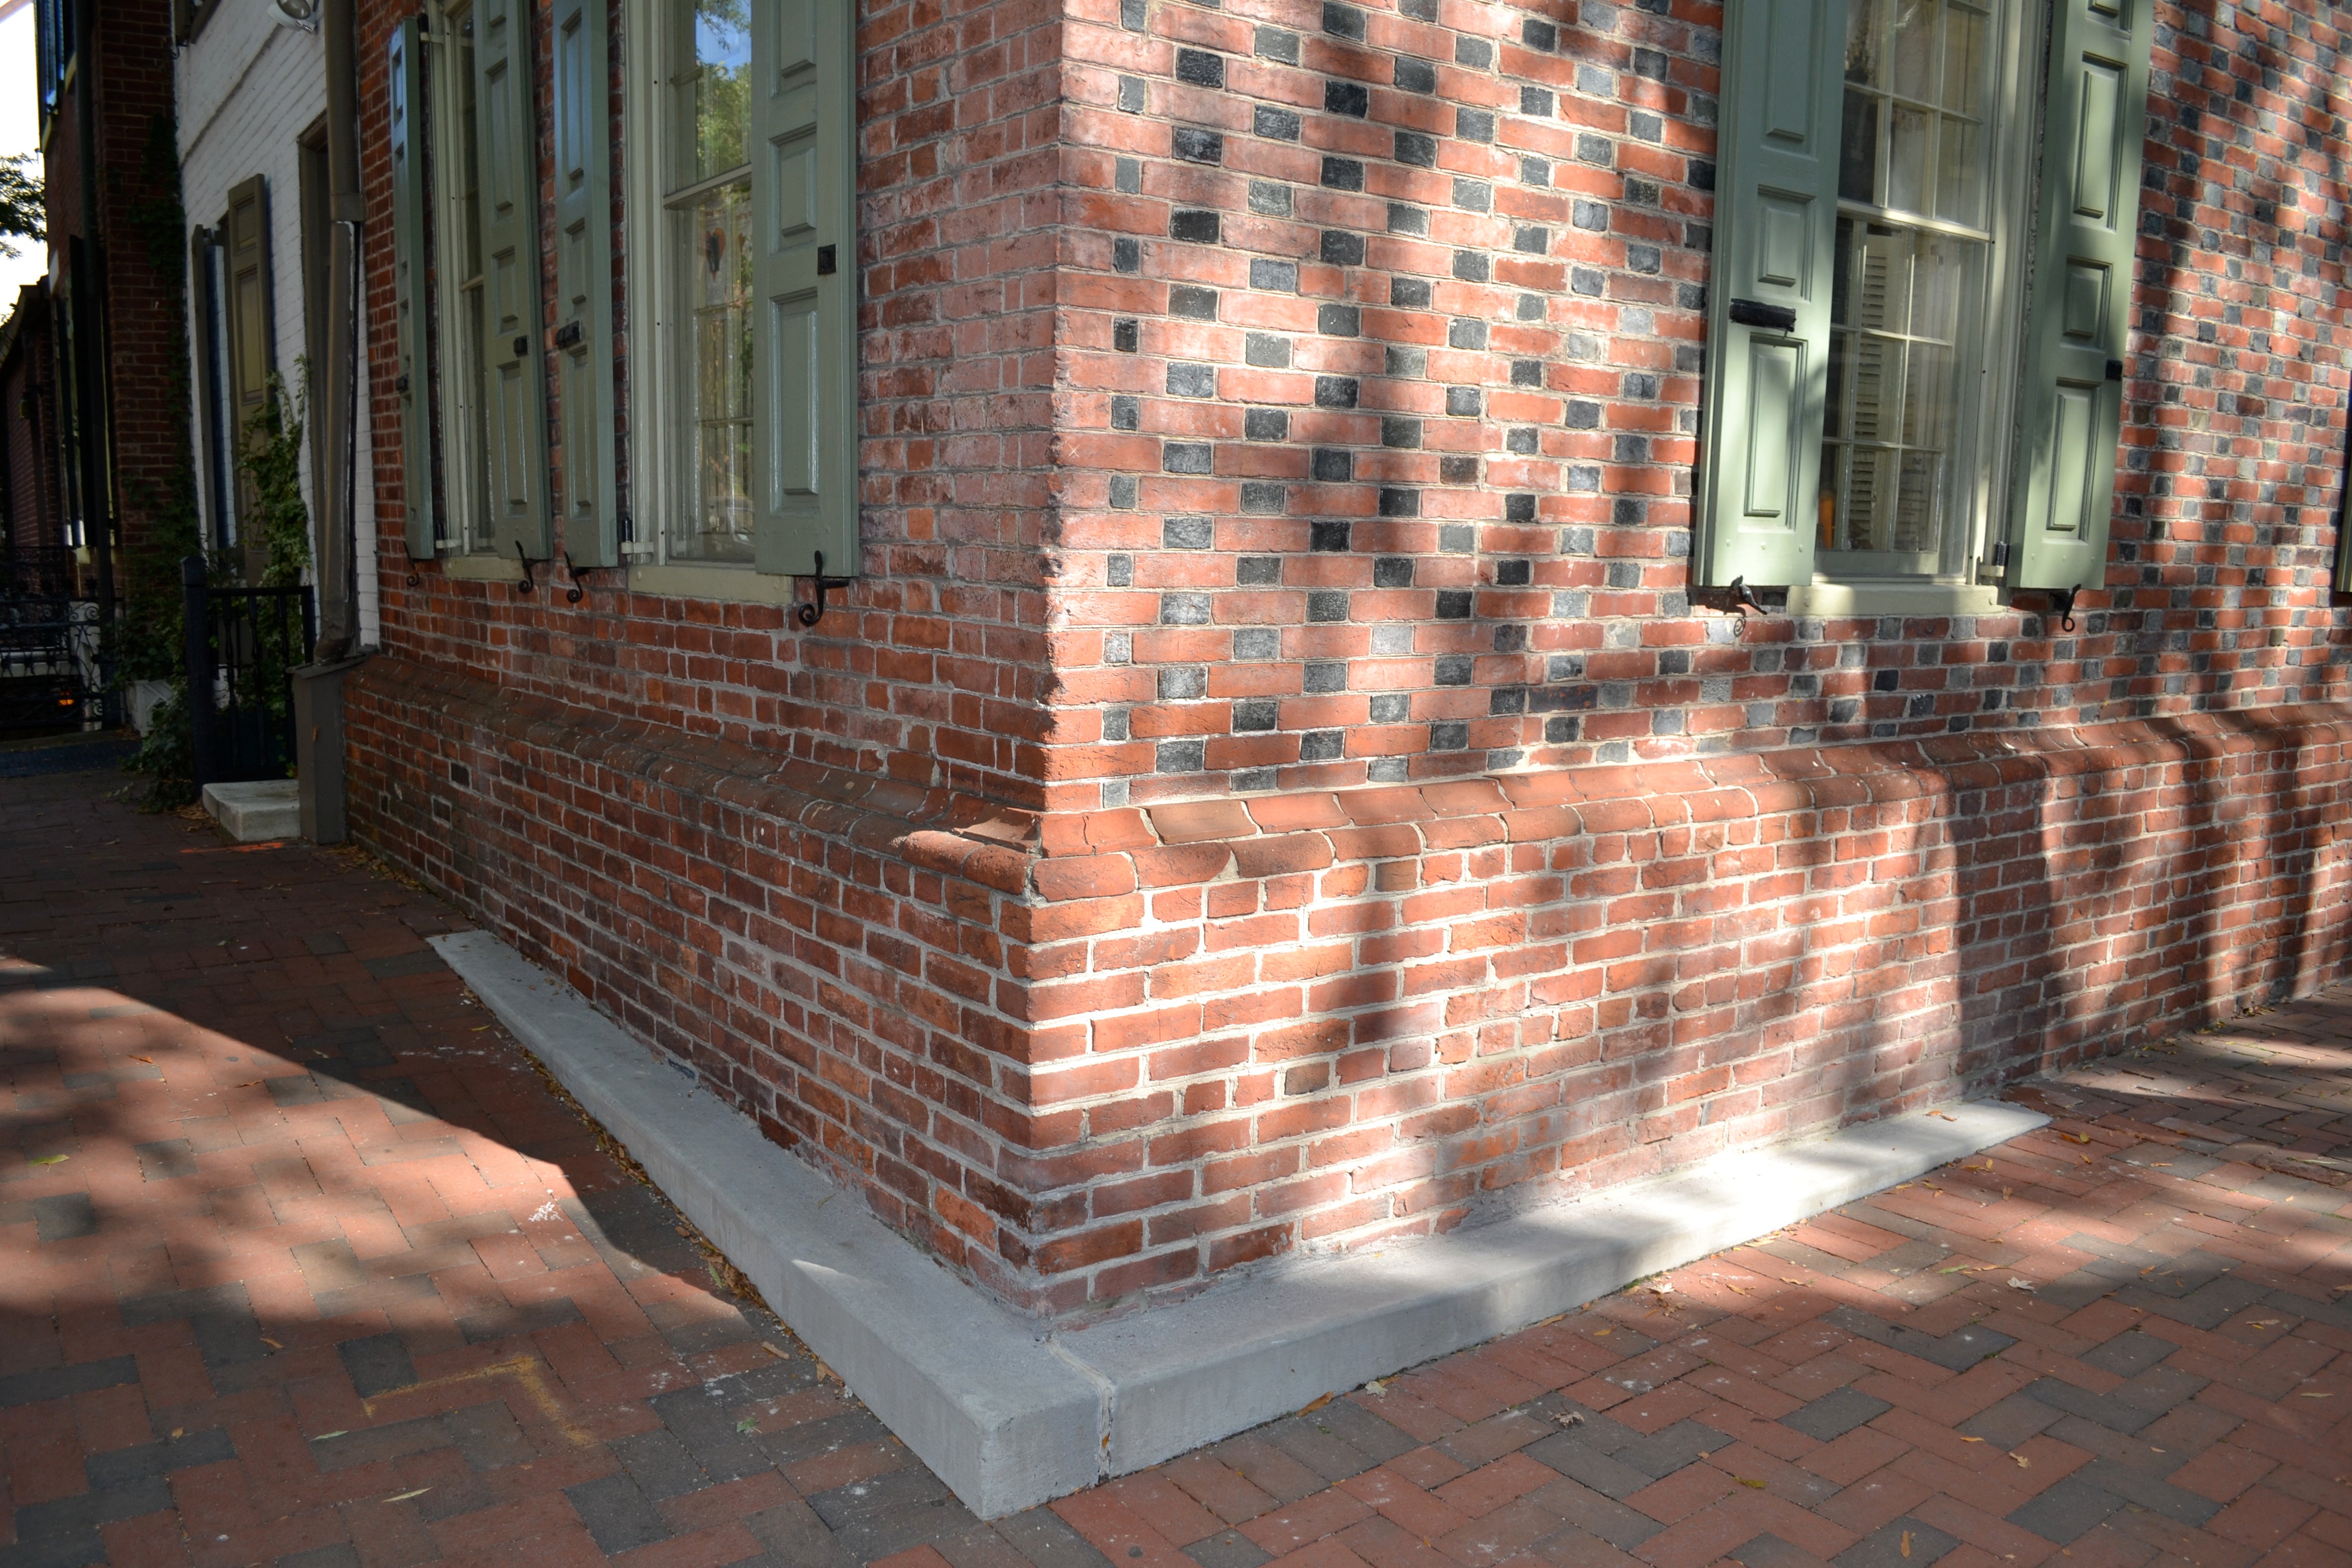 Community members spoke up when the Streets Department installed a concrete cheek wall on a historic, brick home